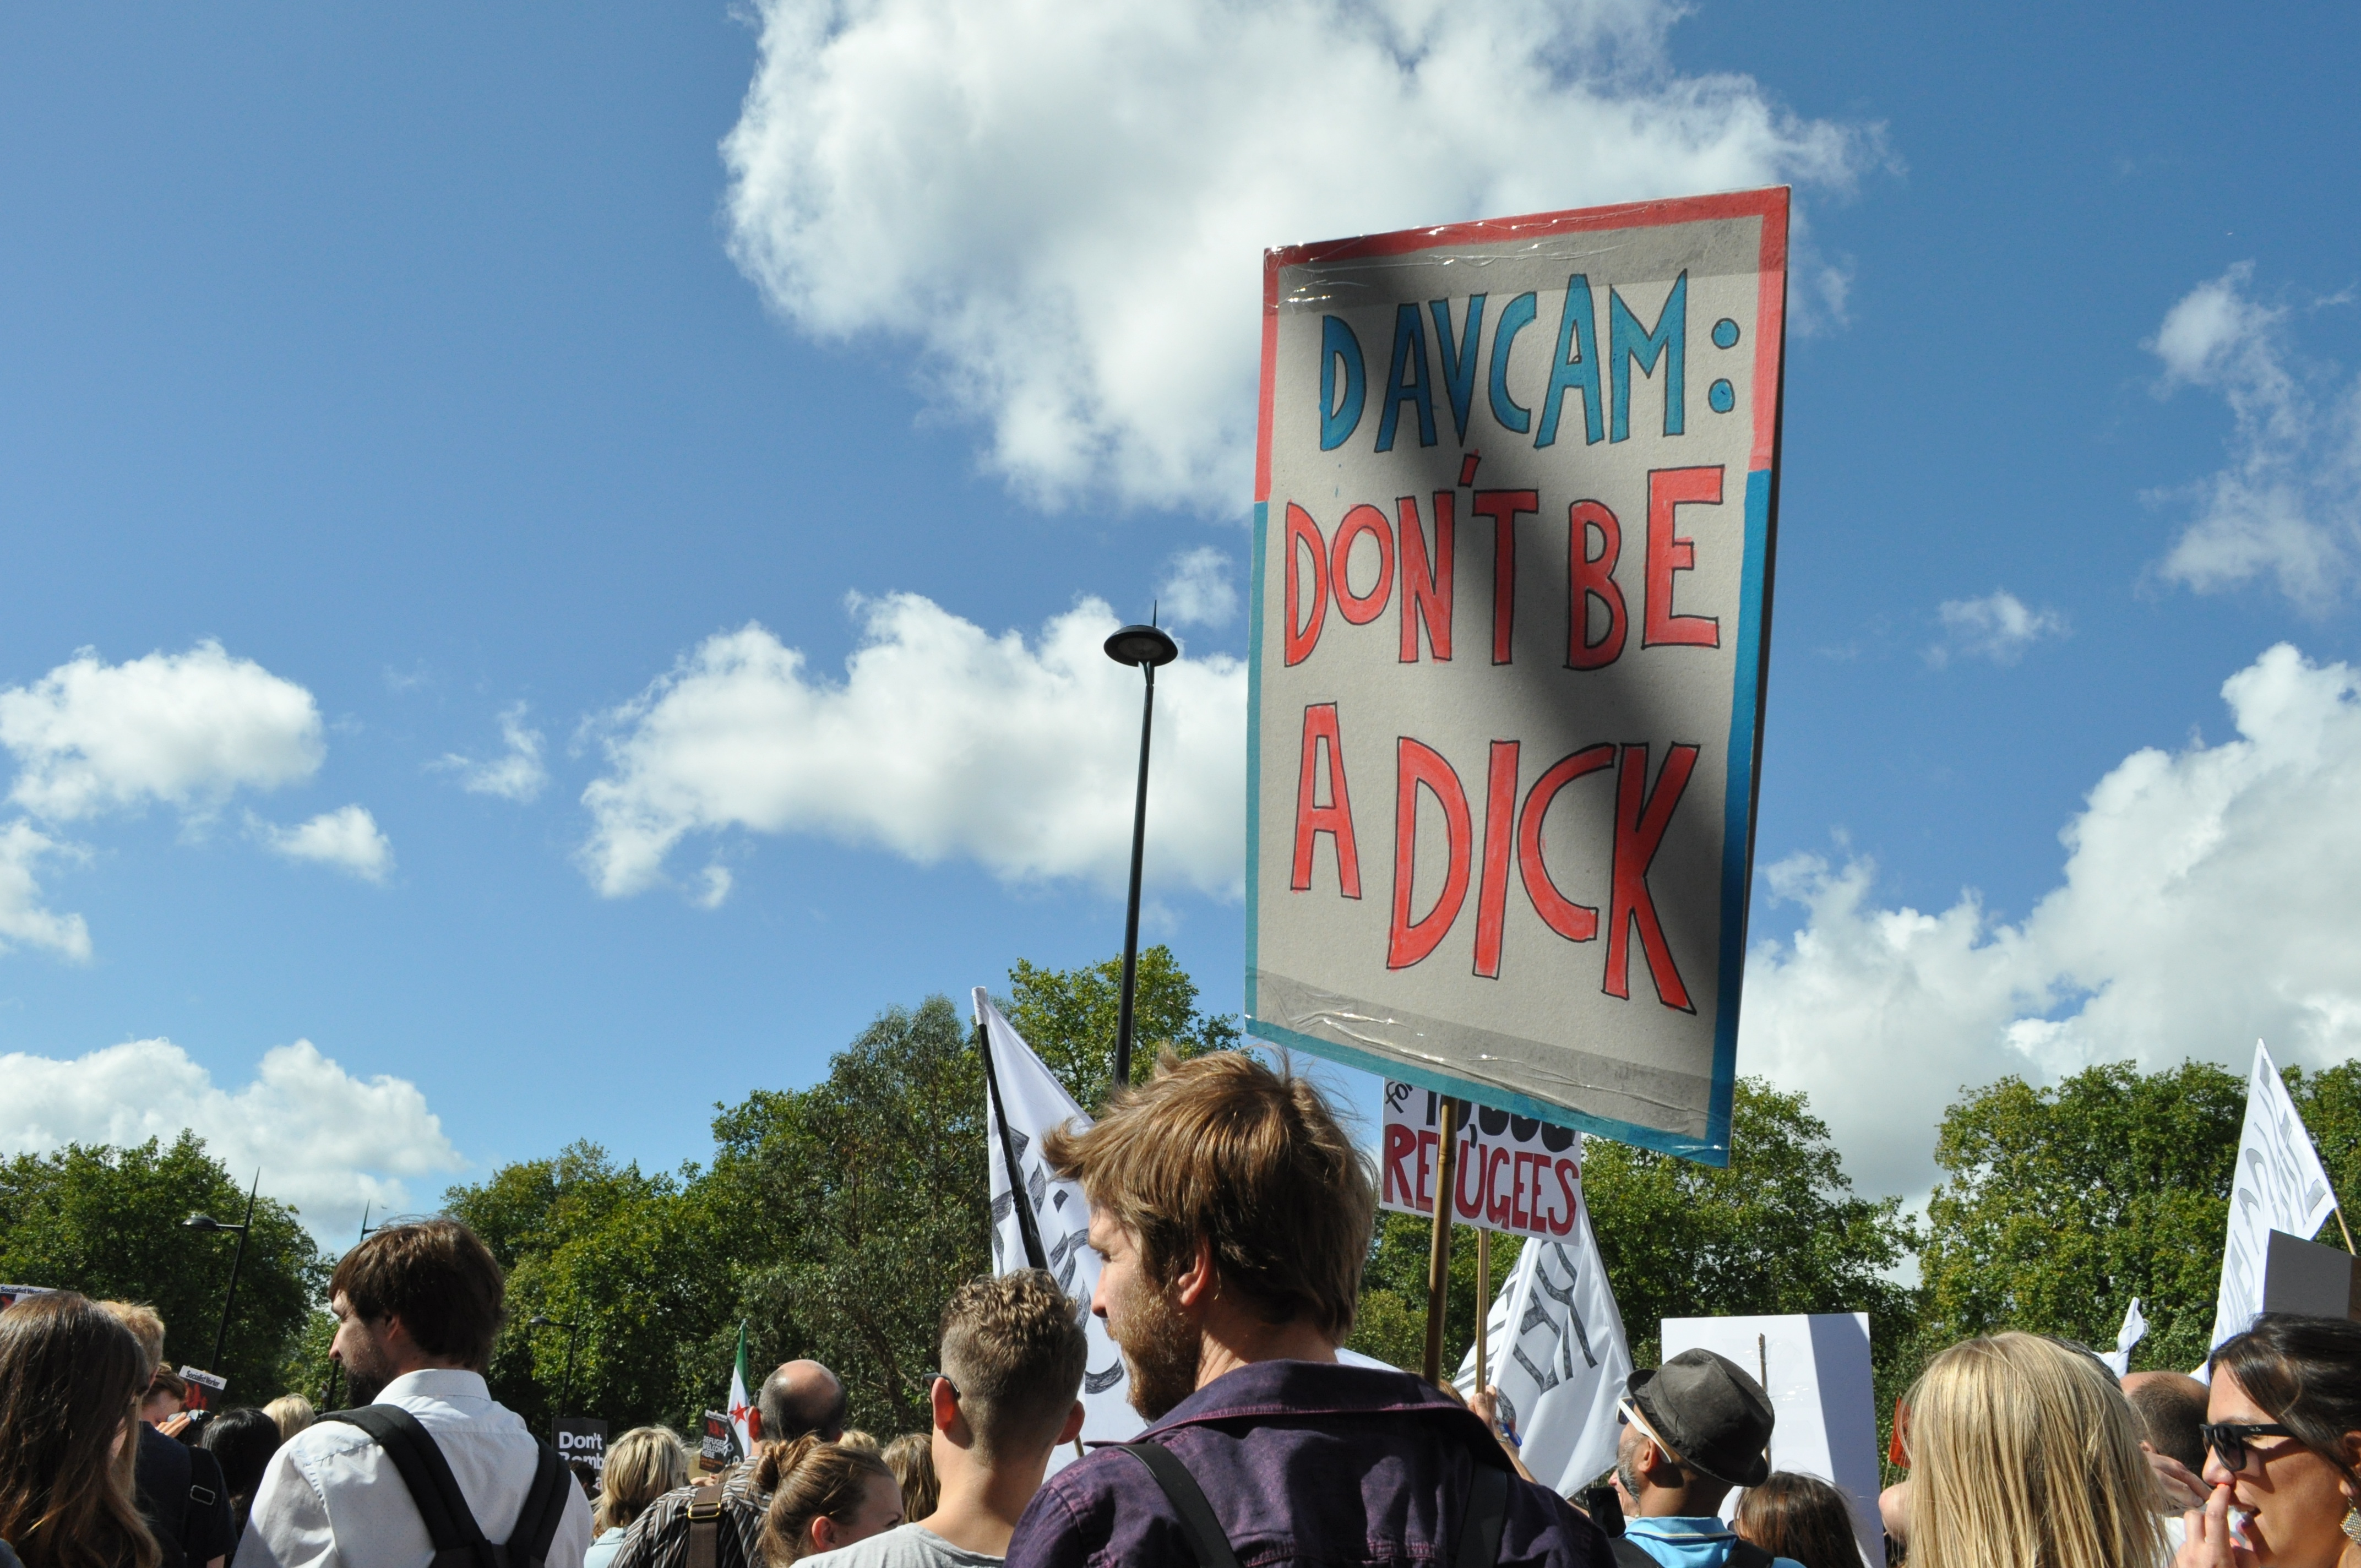 Refugees Welcome March, London, 12/09/15 (Image: Mel Plant)